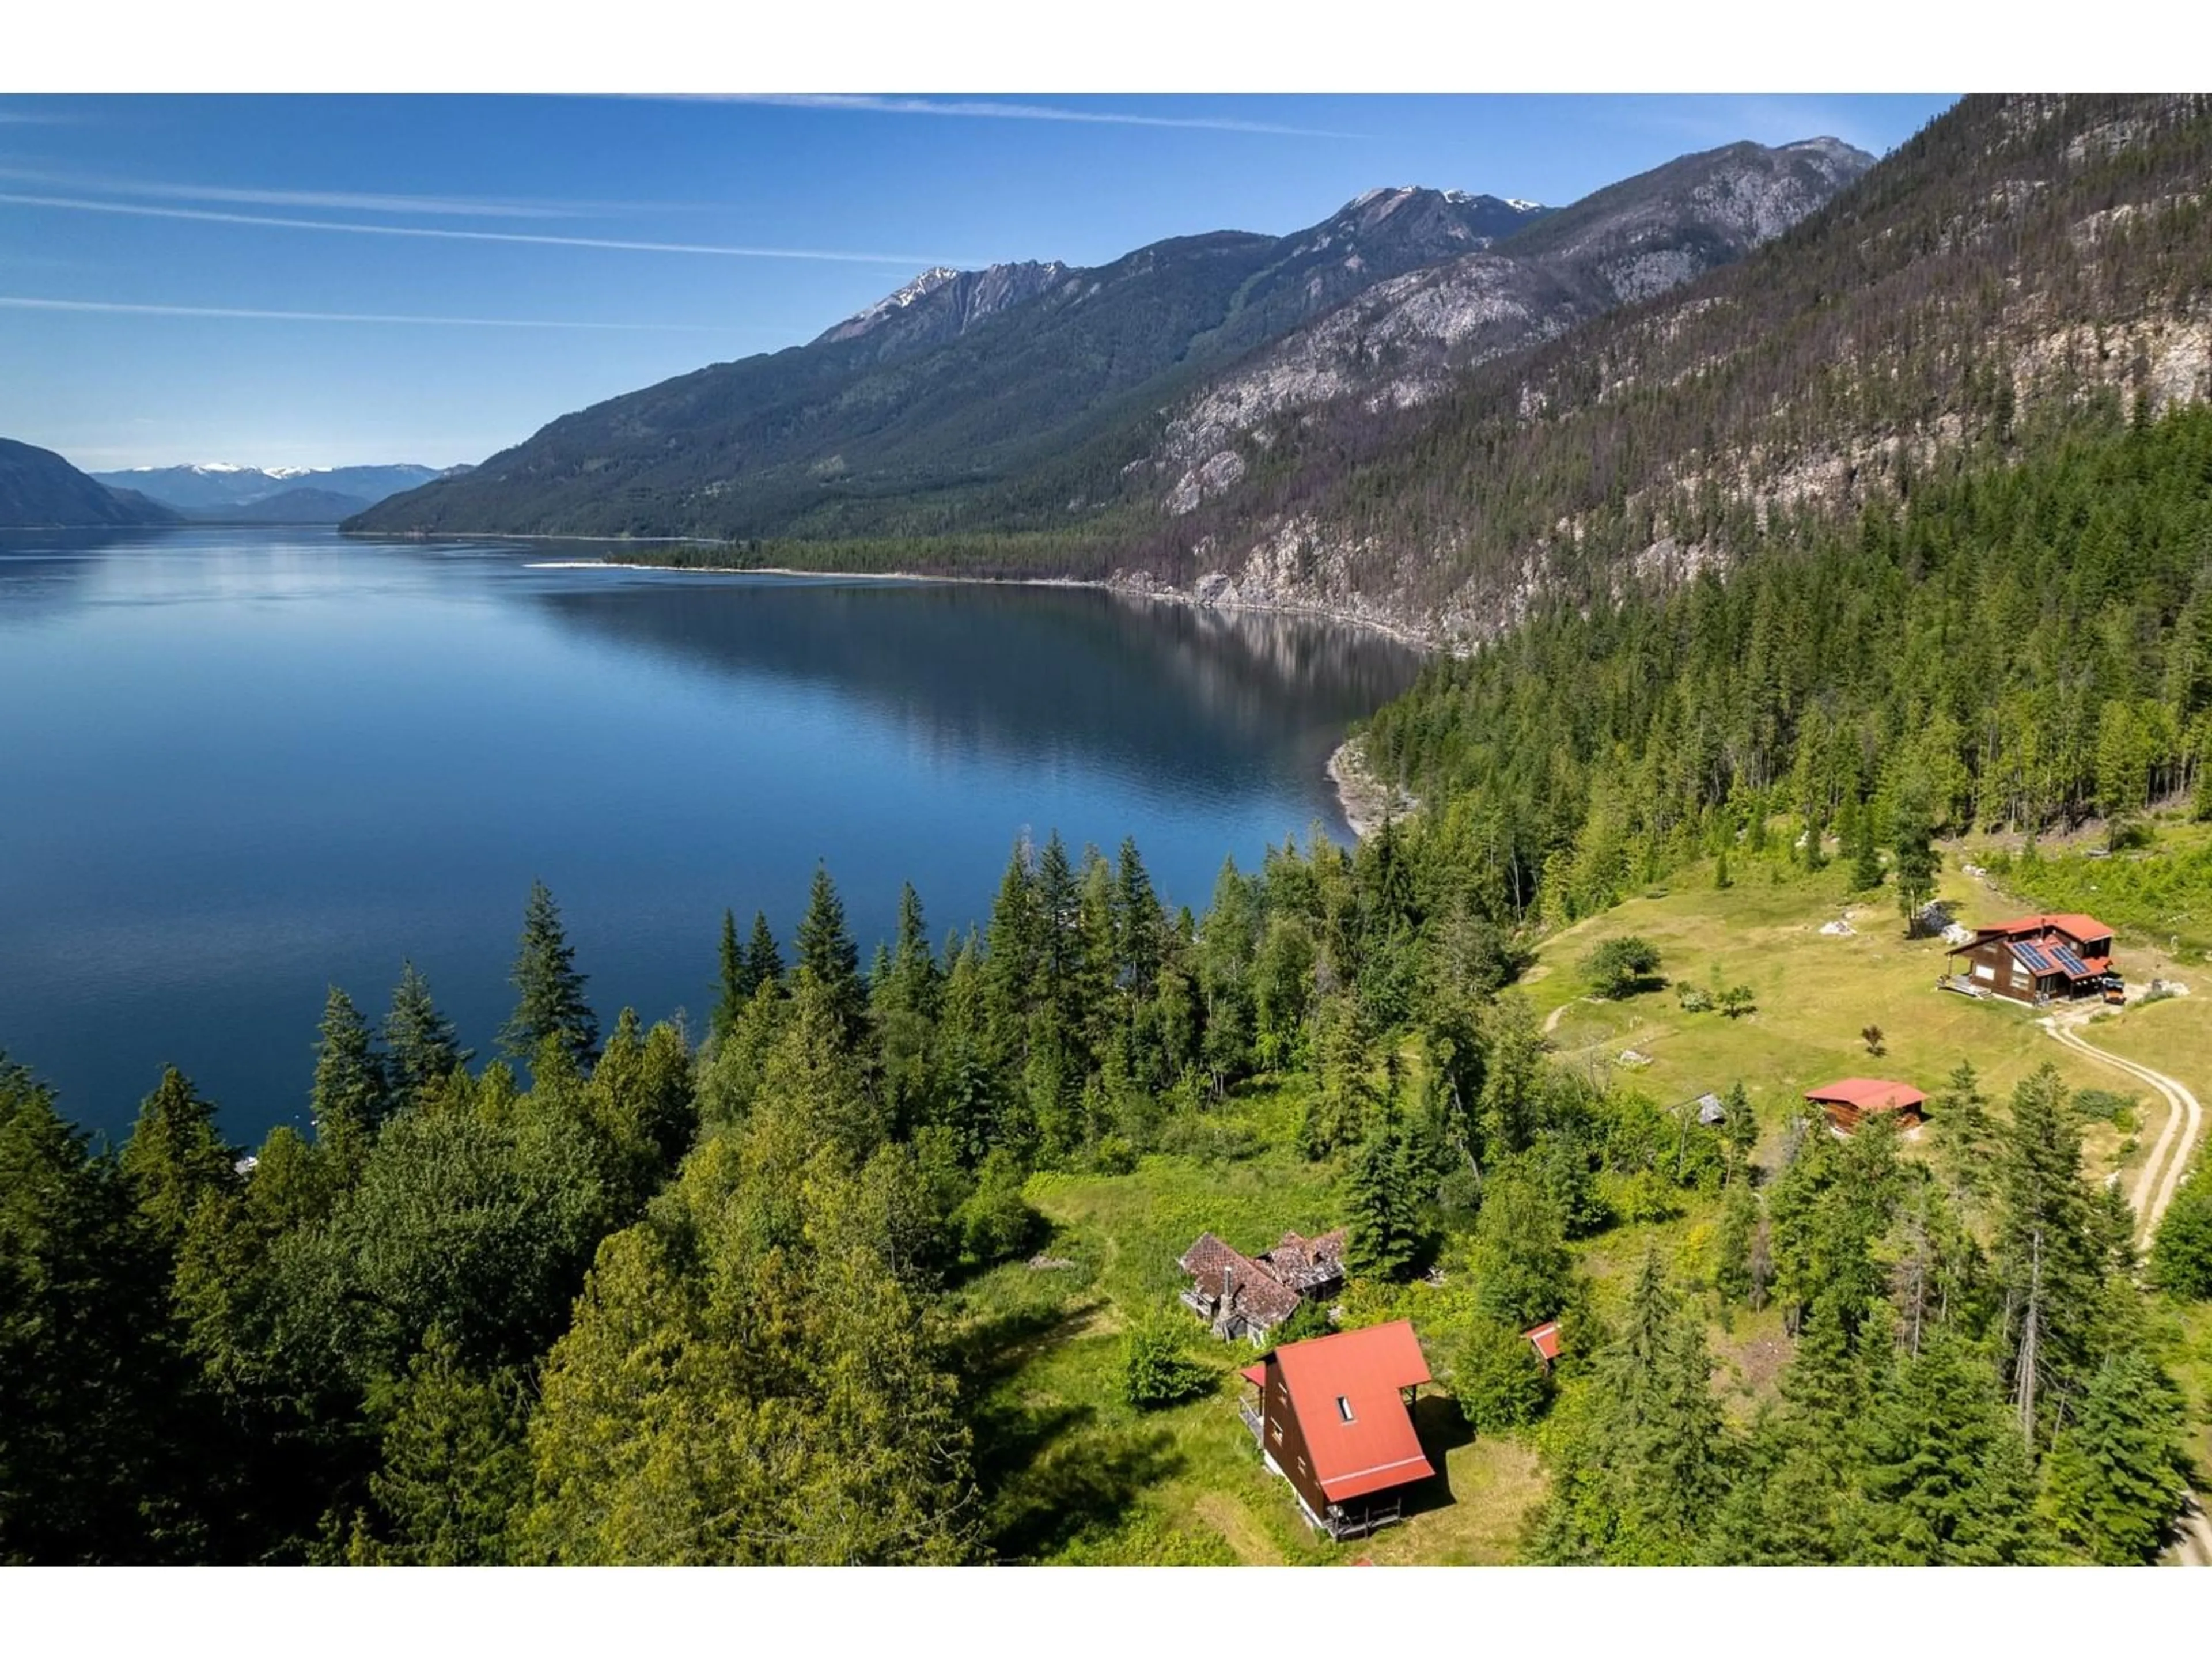 Lakeview for Lot A BIRCHDALE ROAD, Kaslo British Columbia V0G1M0